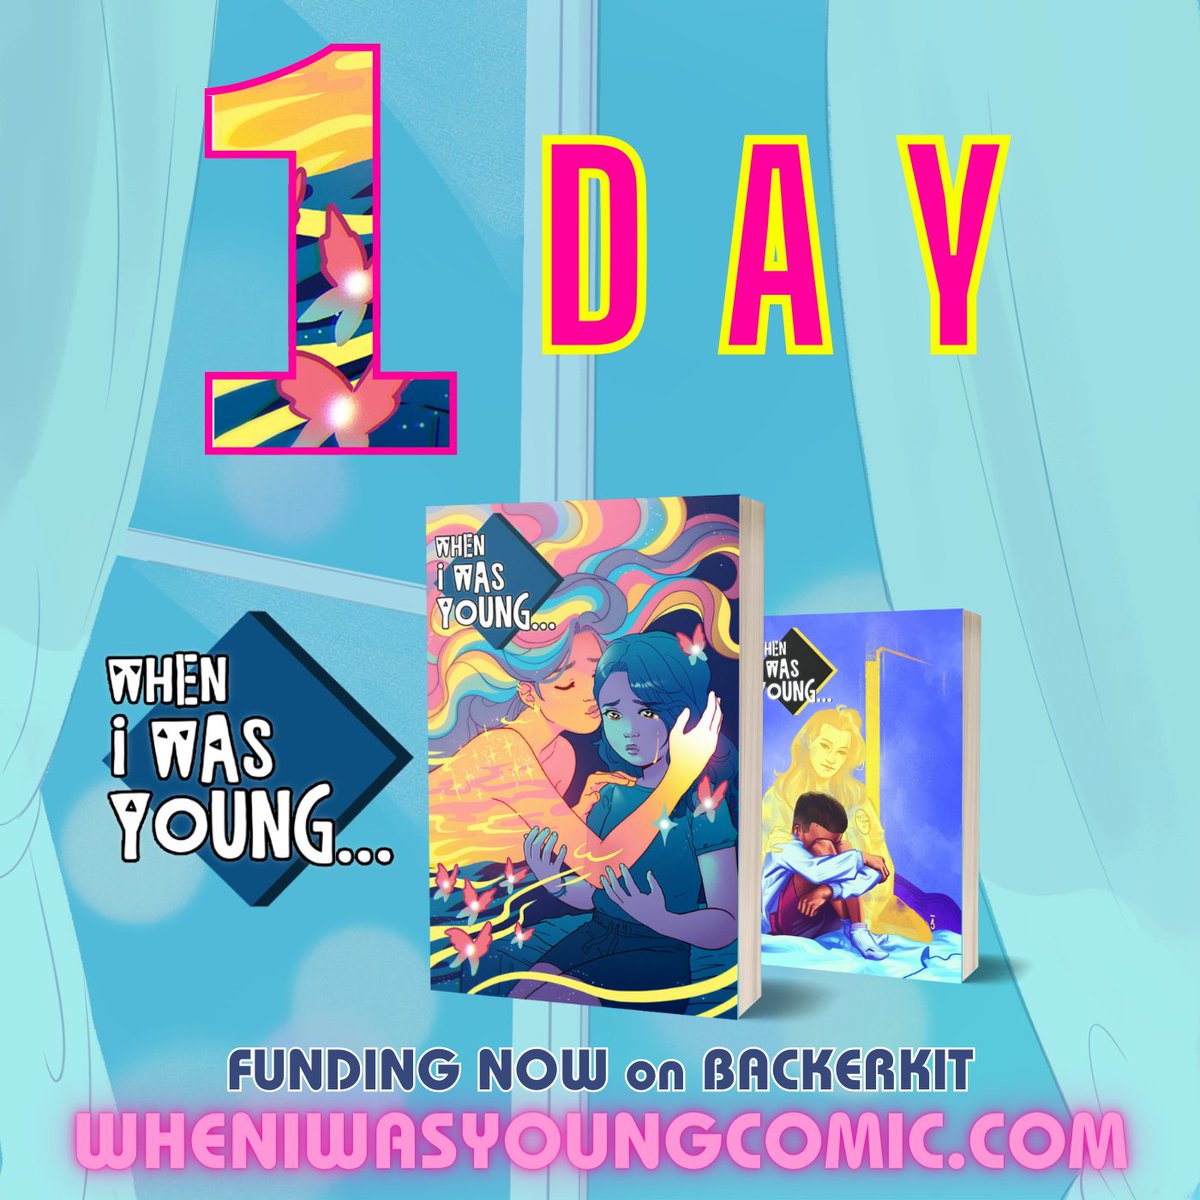 ✨ONE MORE DAY✨ There's about 24 hours left to share and support this campaign! The more we raise, the more we can donate at the end! wheniwasyoungcomic.com